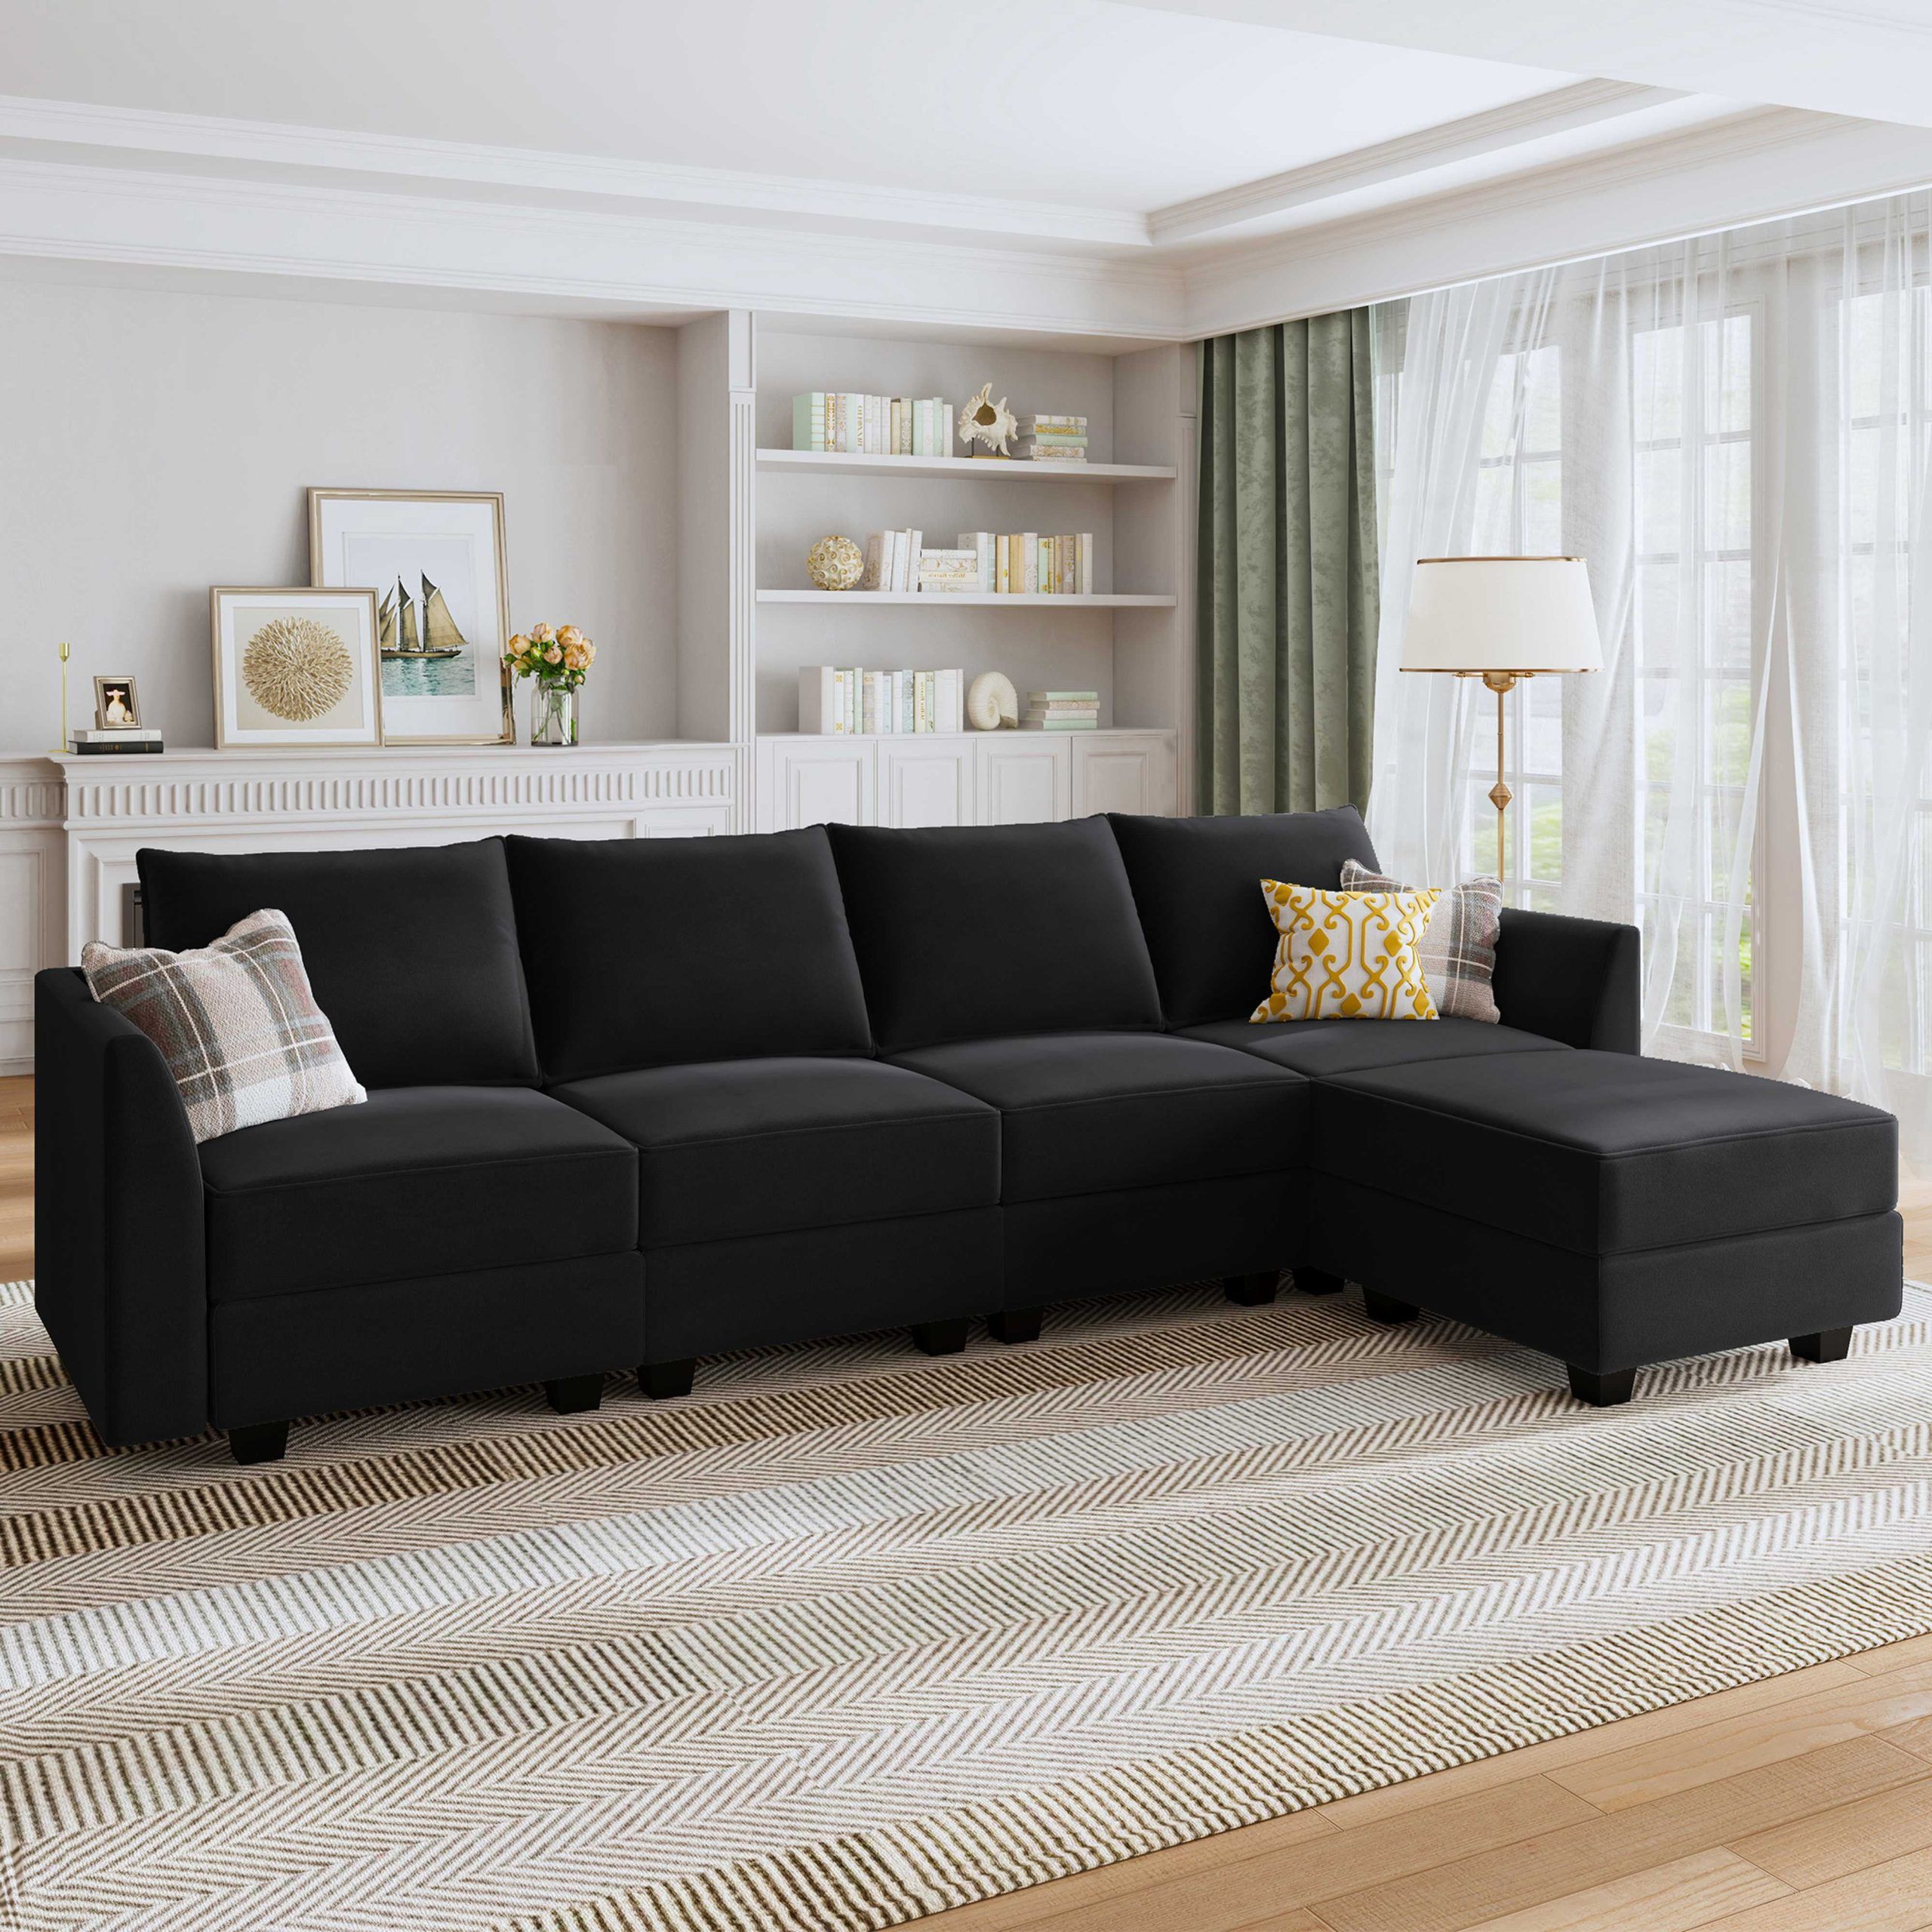 Honbay Modern Velvet Sectional Couch With Storage Seats L Shaped Sofa, Black  – Walmart Within Sofas In Black (View 2 of 15)